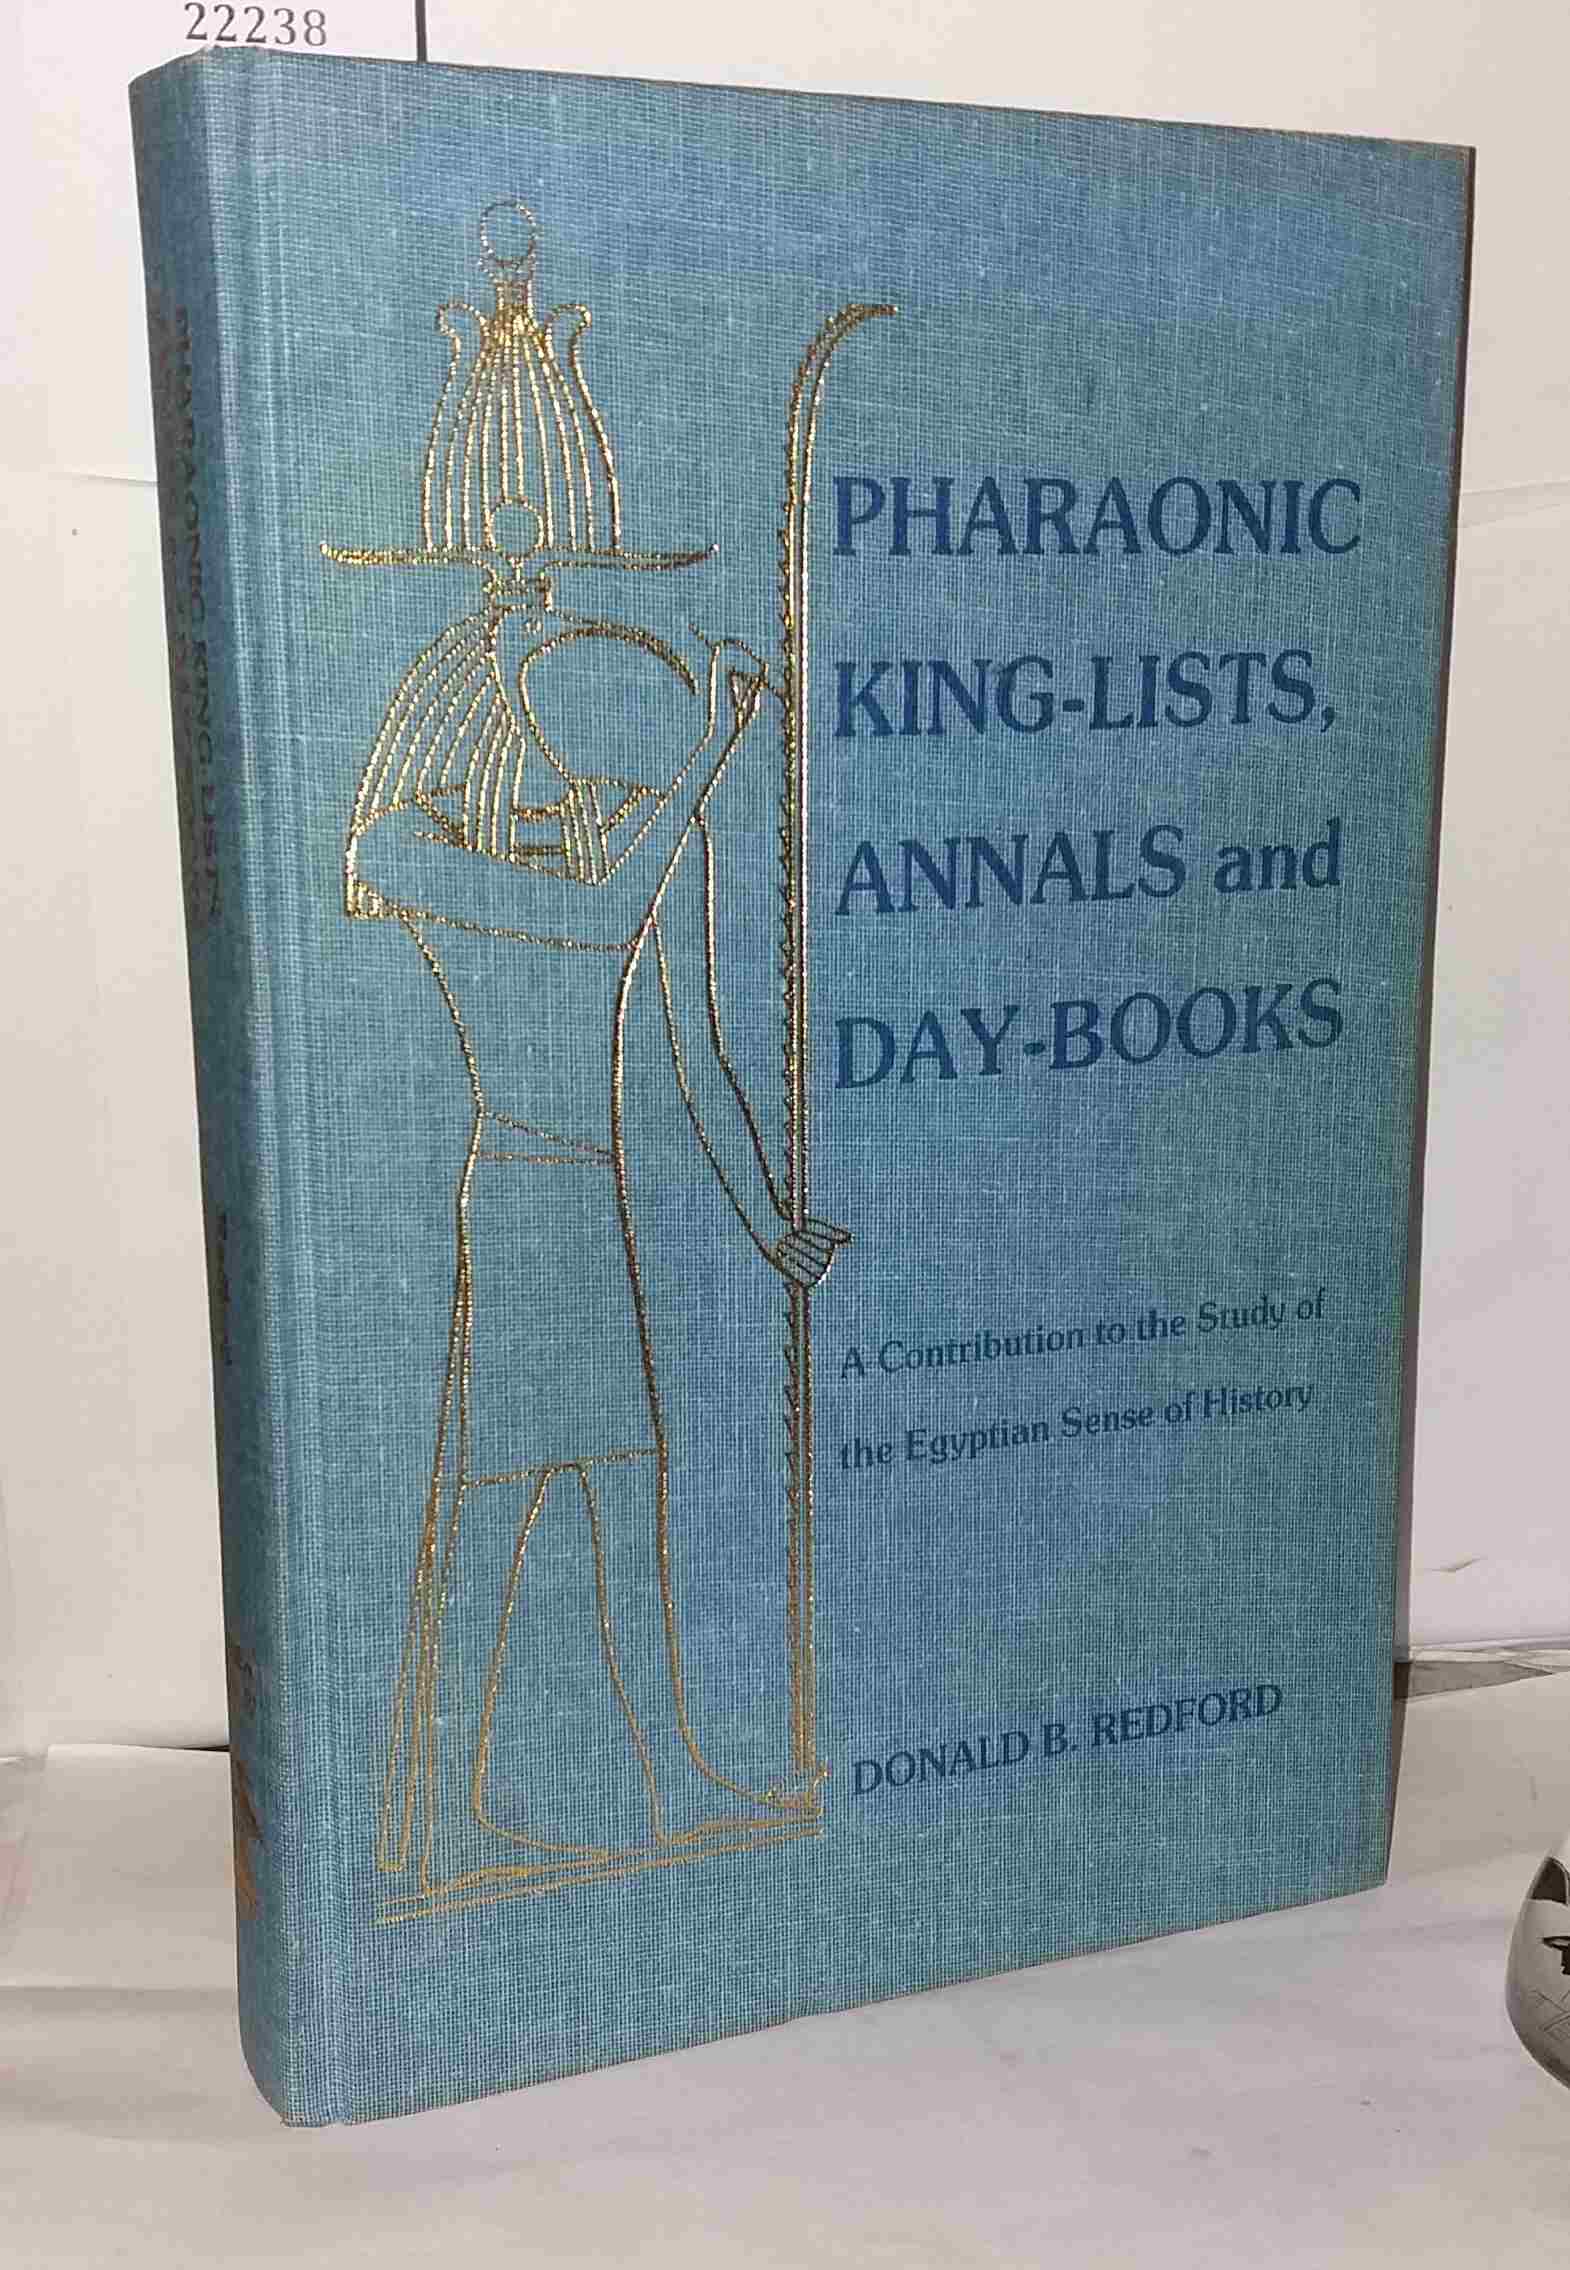 Pharaonic King-Lists Annals and Day-Books - Redford Donald B